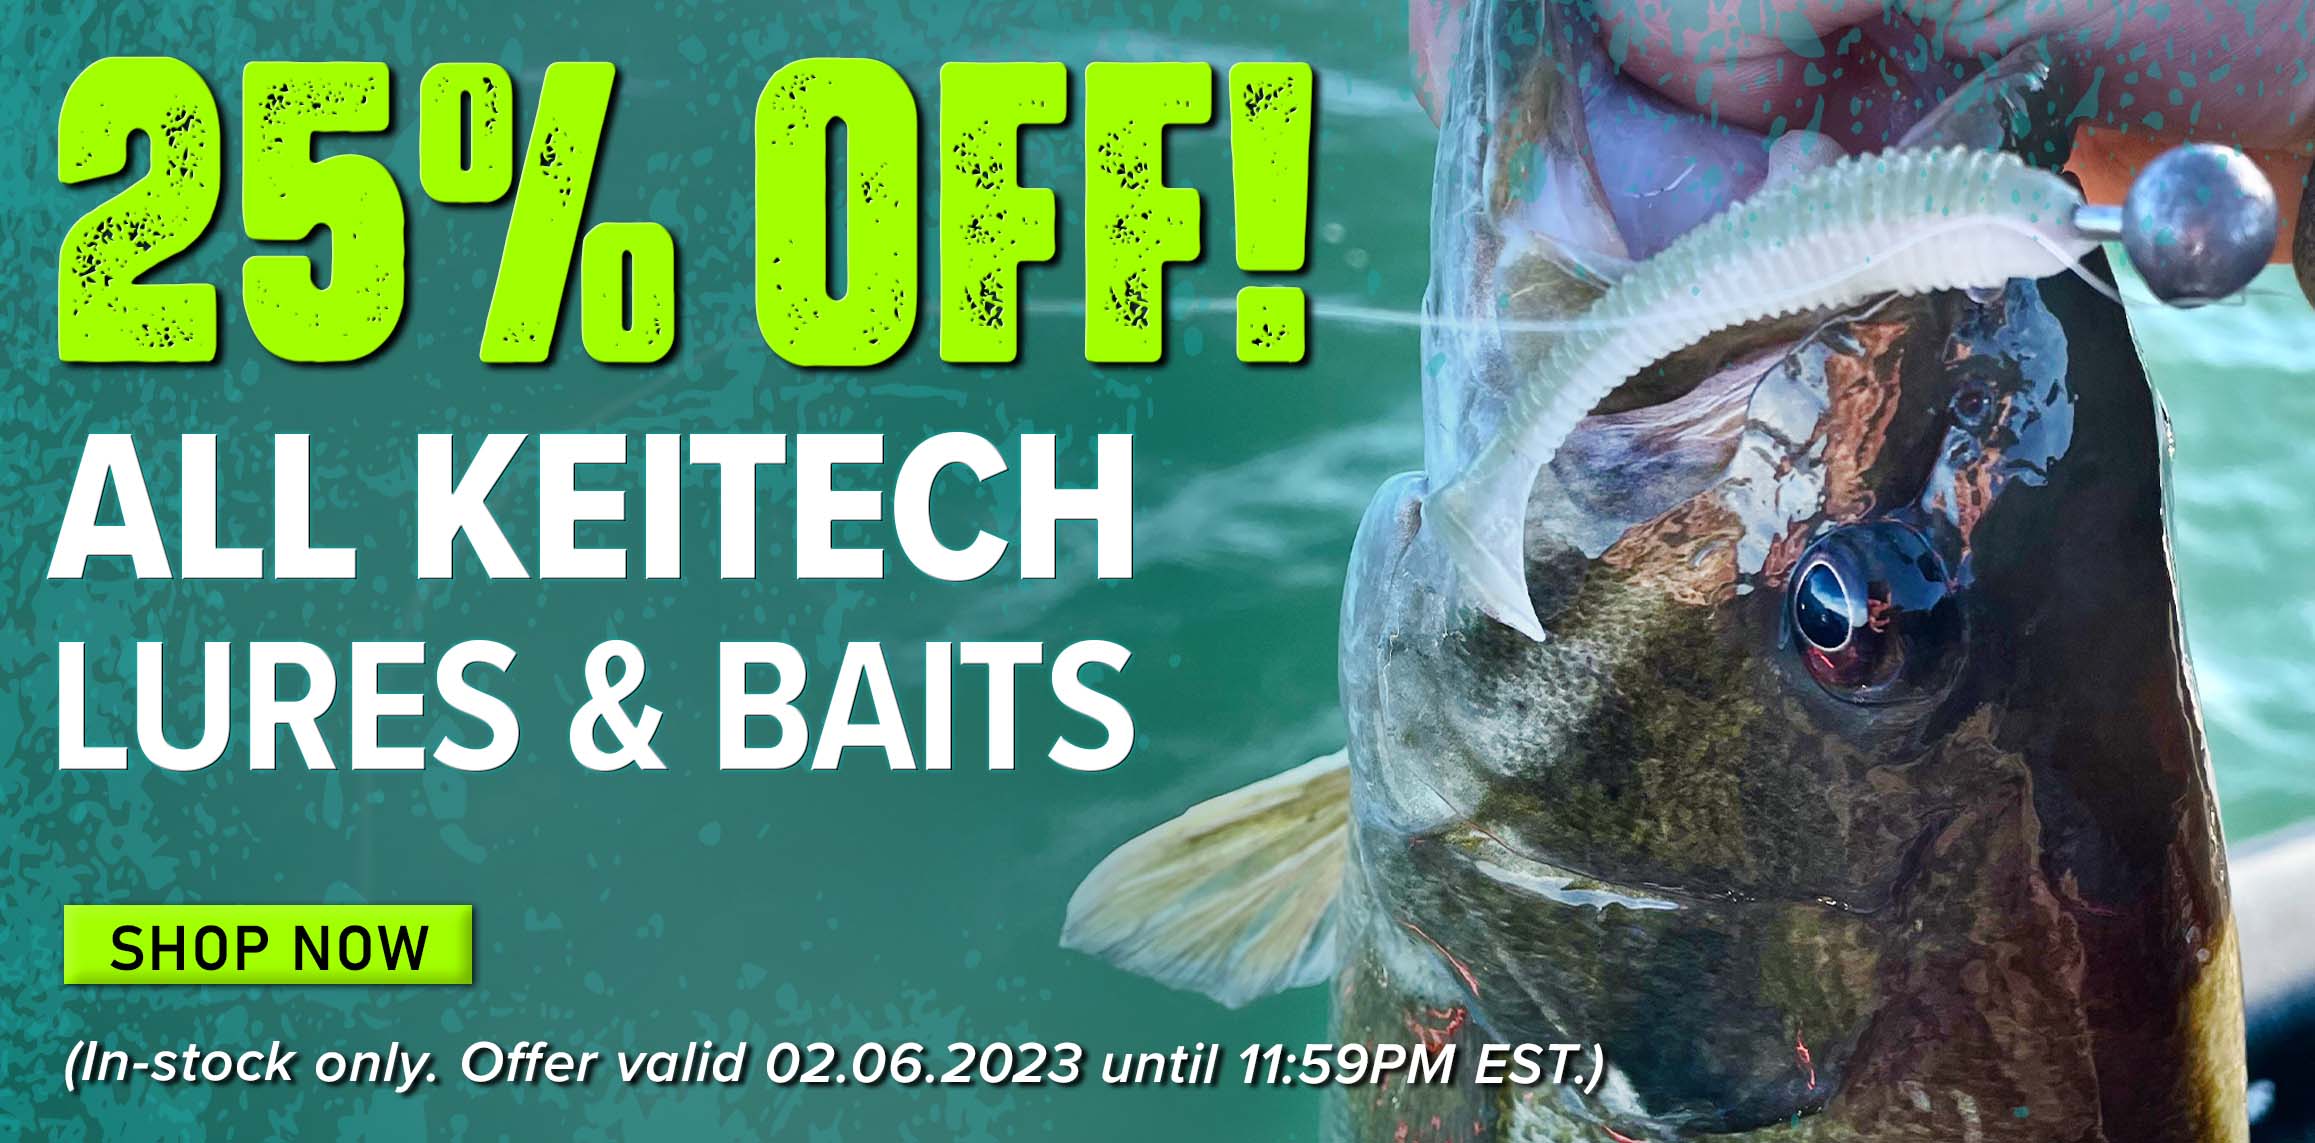 All Keitech Lures & Baits 25% Off - Fish USA